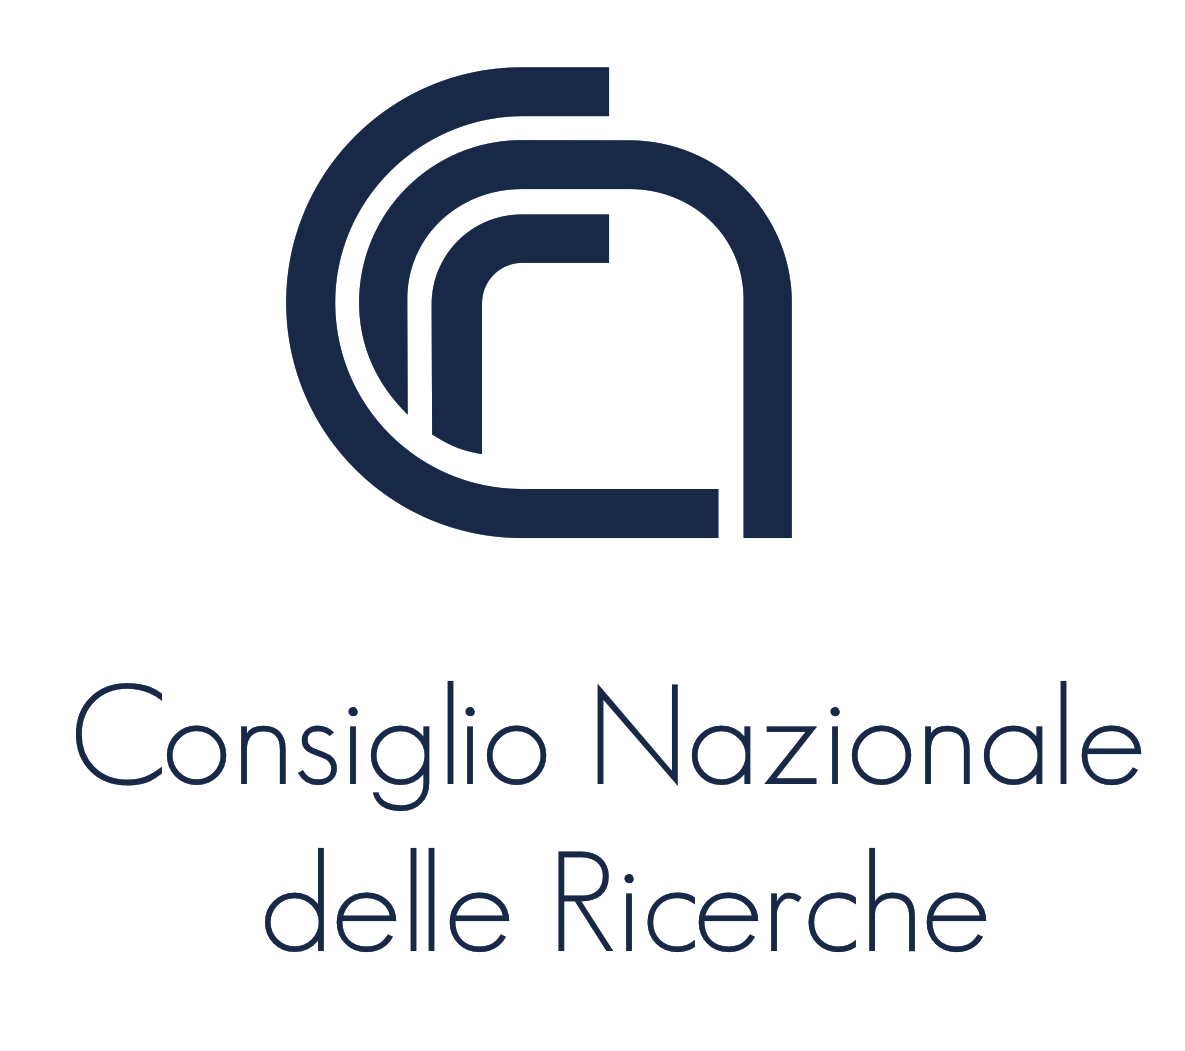 https://www.yizuo-media.com/photos/cpg/albums/userpics/10001/Consiglio_Nazionale_delle_Ricerche2CCNR.png